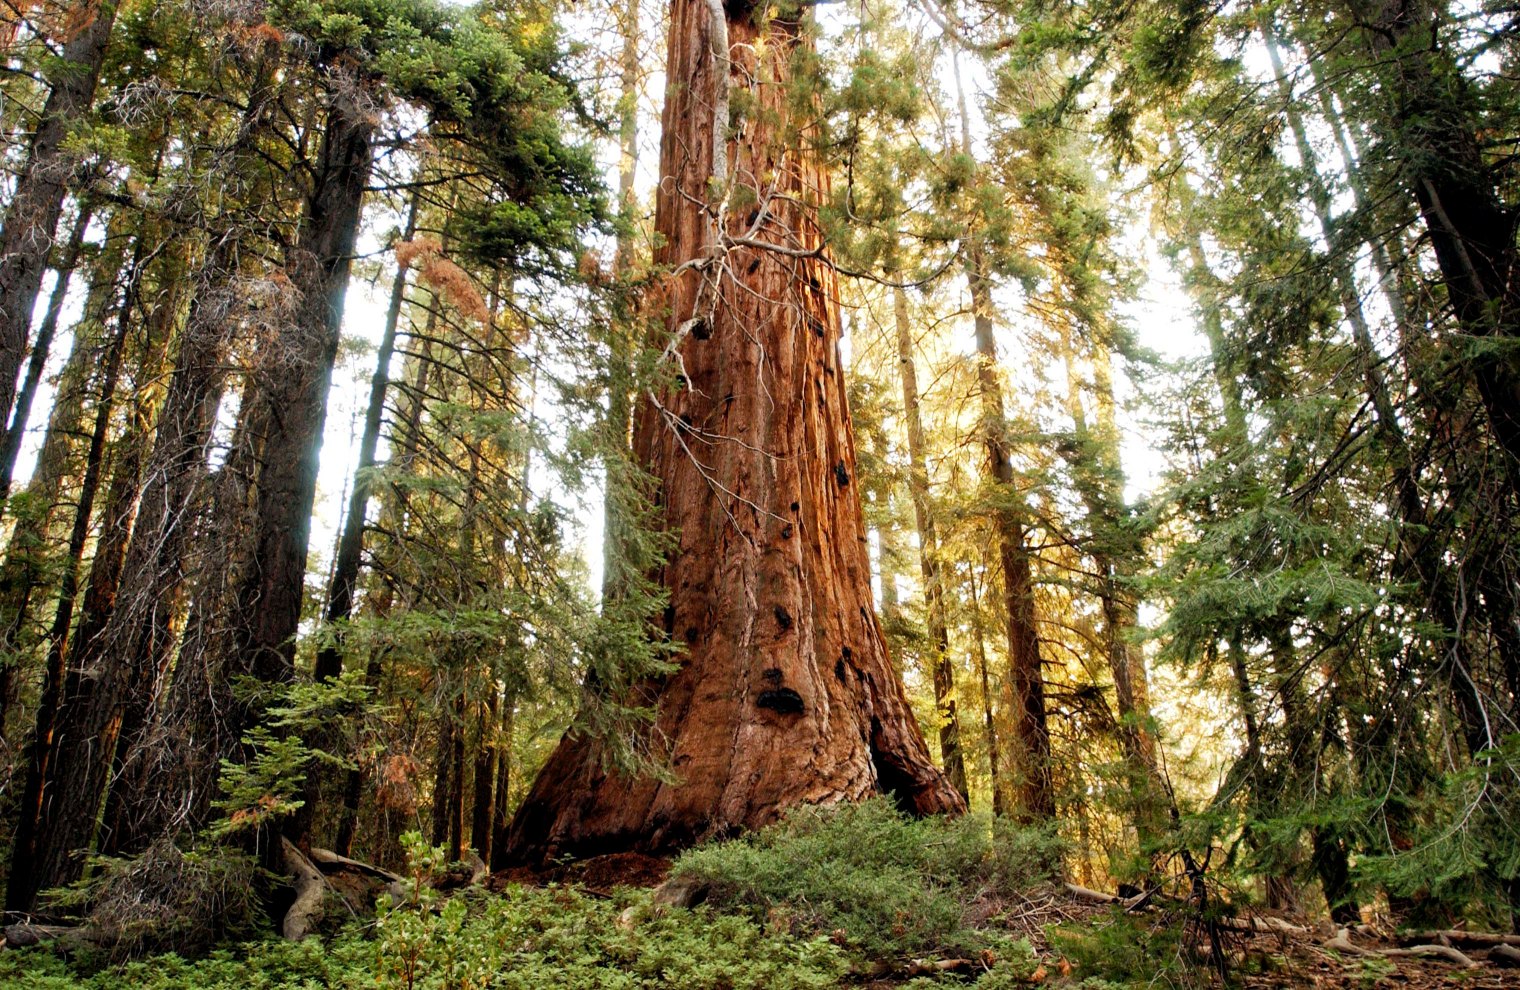 A sequoia tree, Trail of the 100 Giants, California.